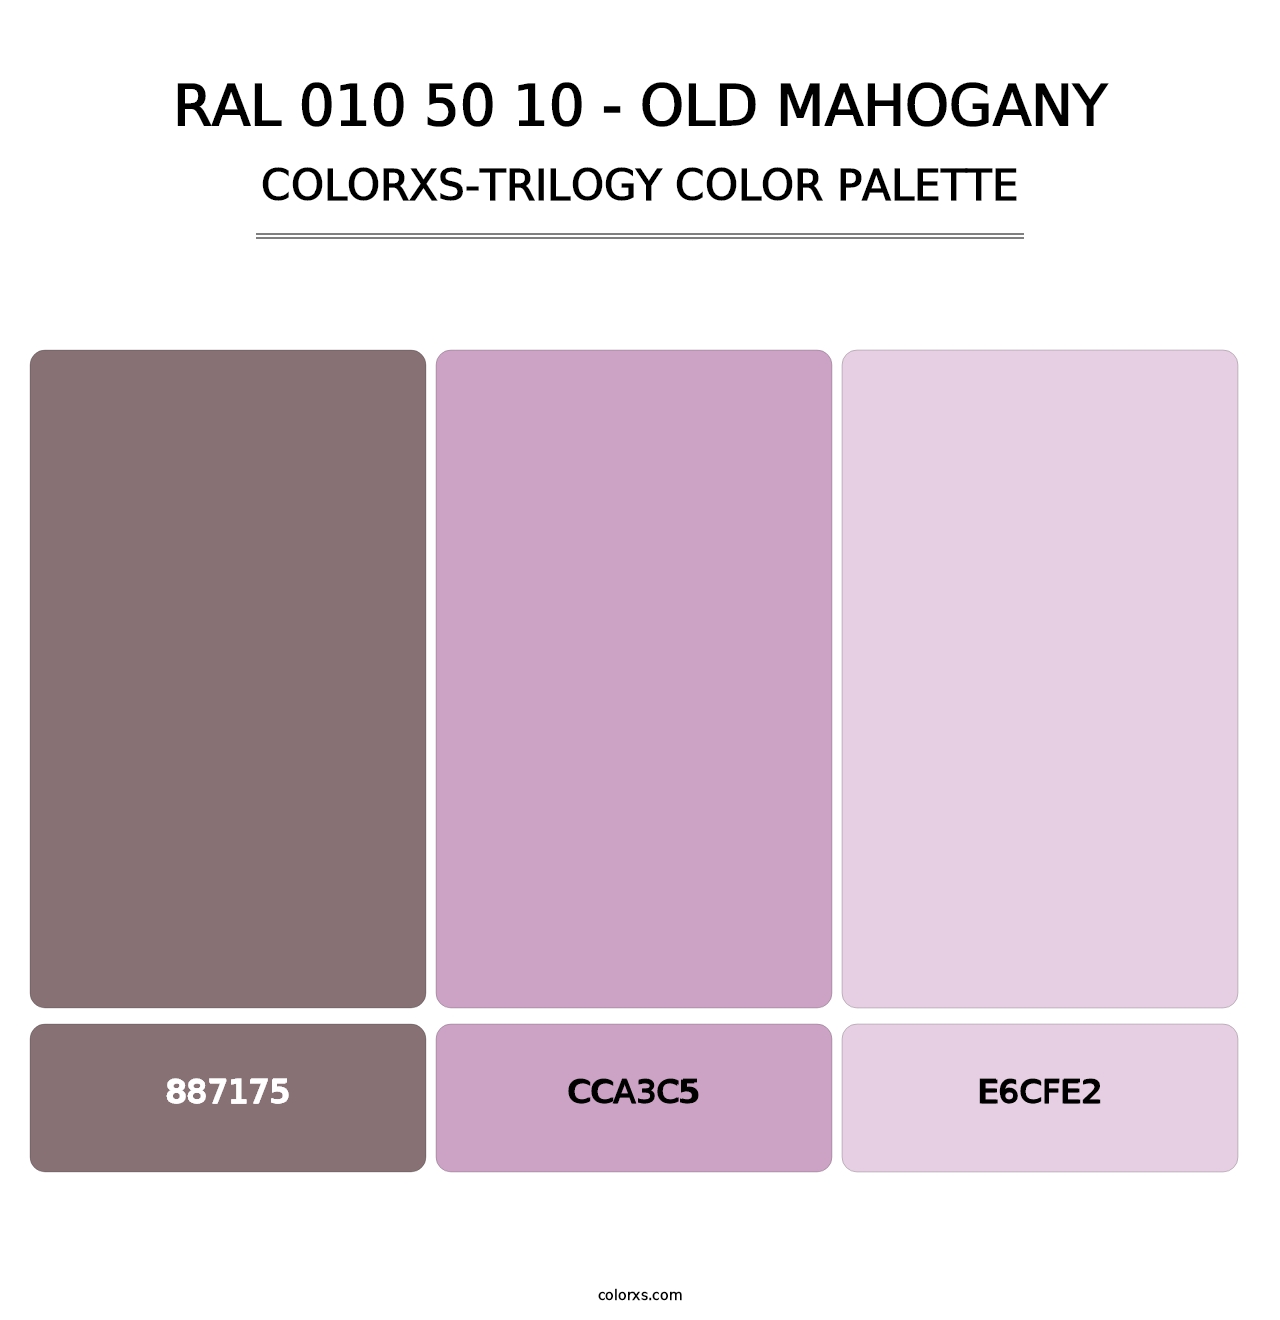 RAL 010 50 10 - Old Mahogany - Colorxs Trilogy Palette